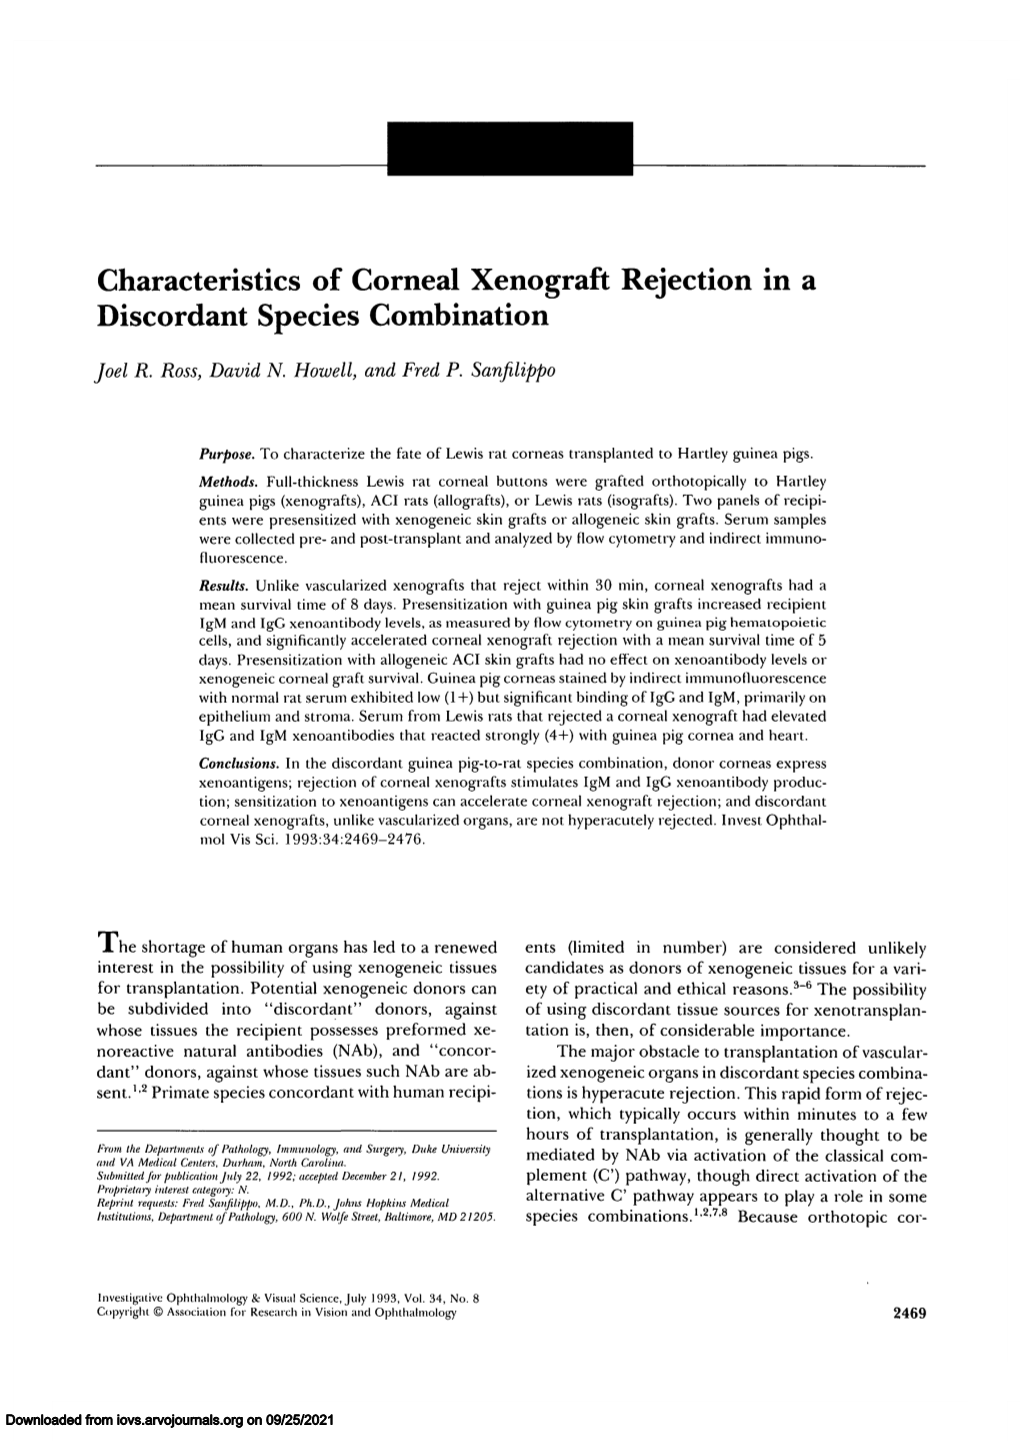 Characteristics of Corneal Xenograft Rejection in a Discordant Species Combination